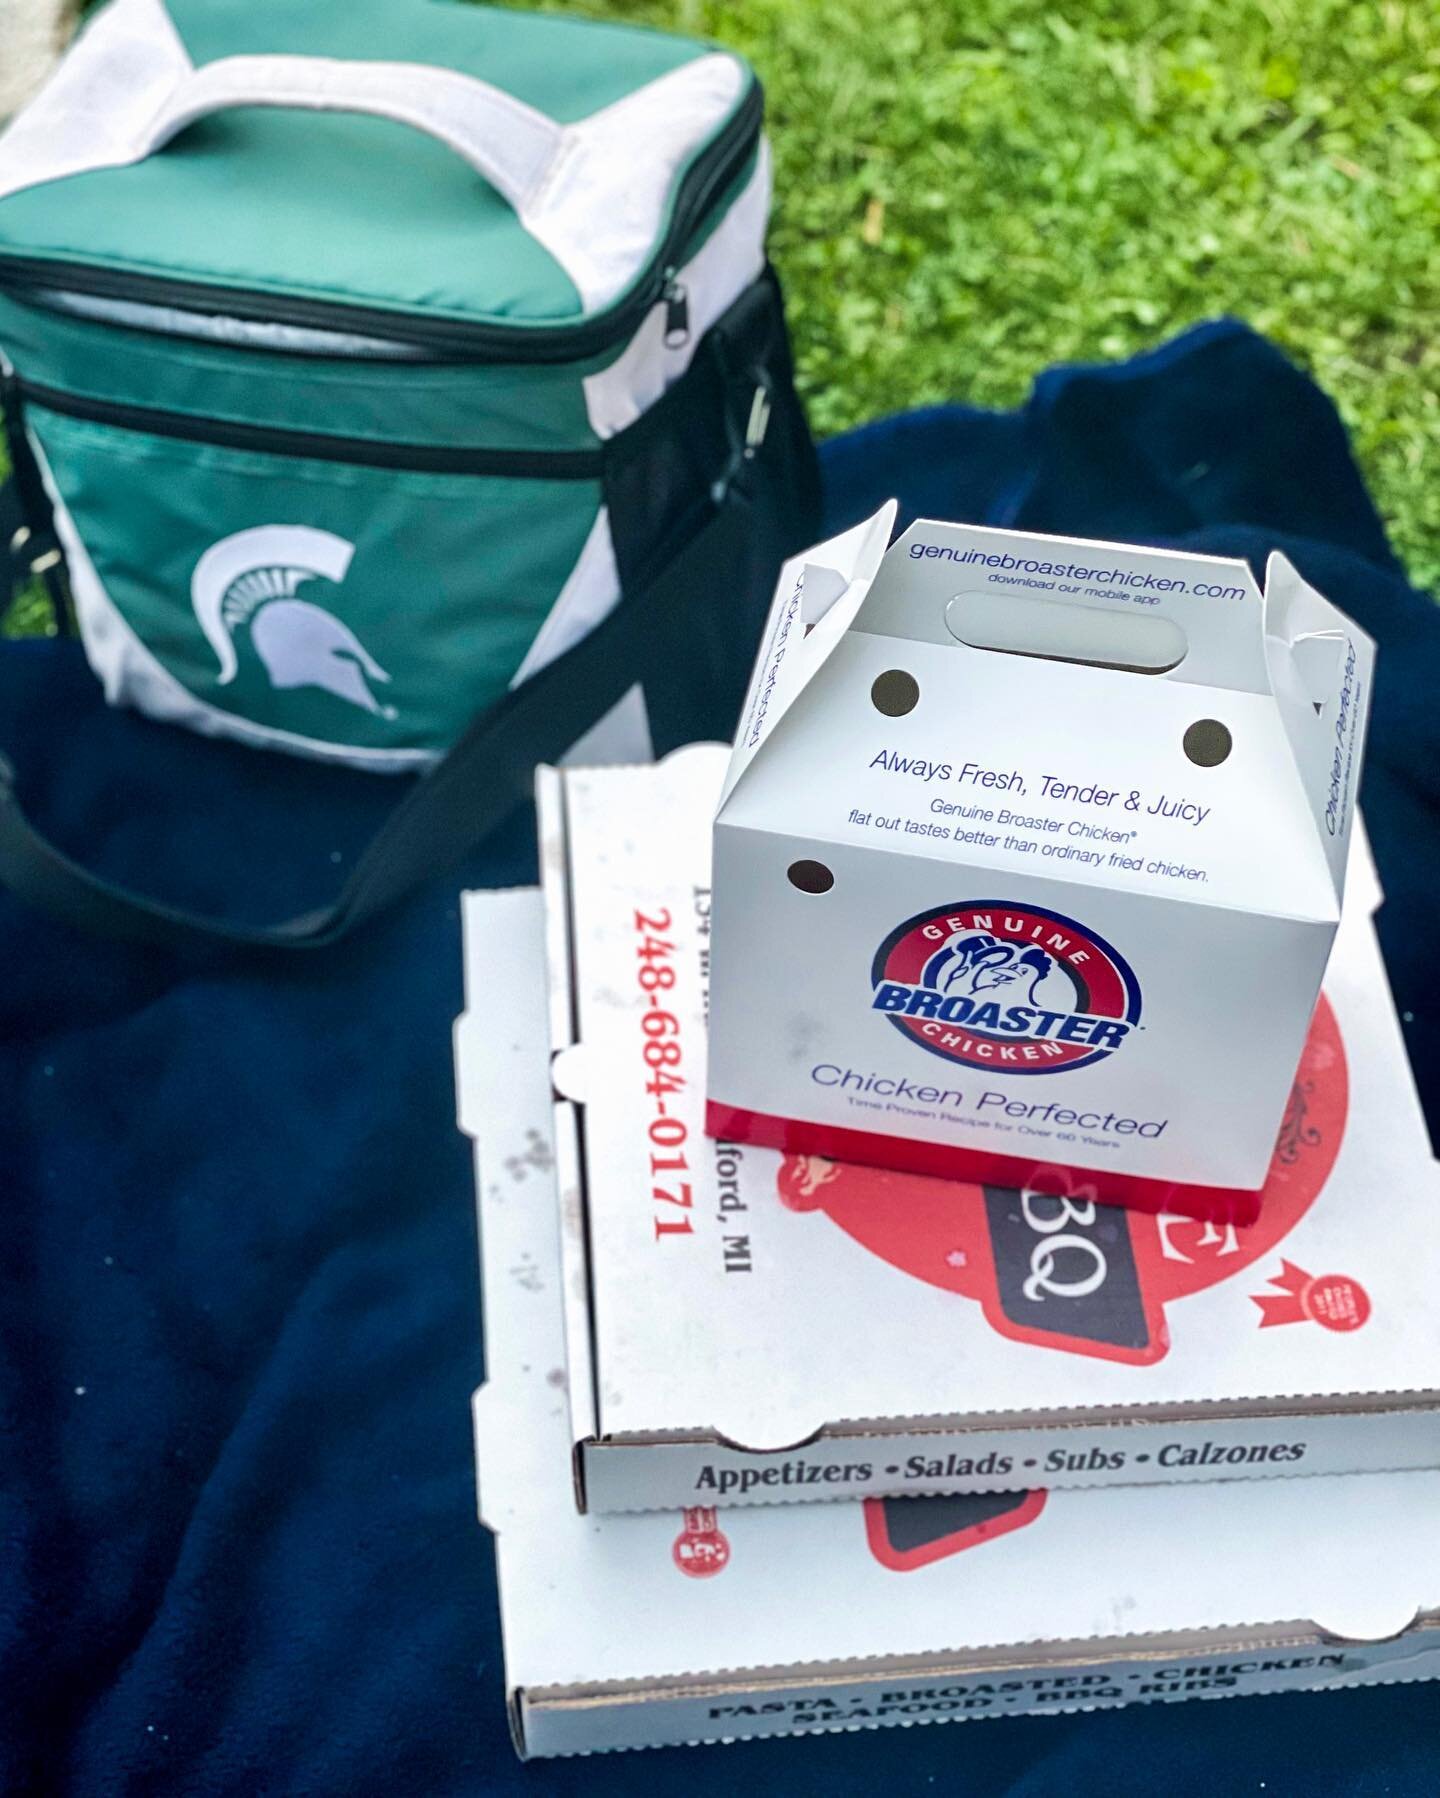 LABOR DAY is just around the corner! What are your plans?! ☀️ Summer is coming to a close but our next favorite season is upon us&hellip;.hint hint? 😜🏈

#labordayweekend #summervibes #backtoschool #footballseasonishere #collegefootball #michigansta